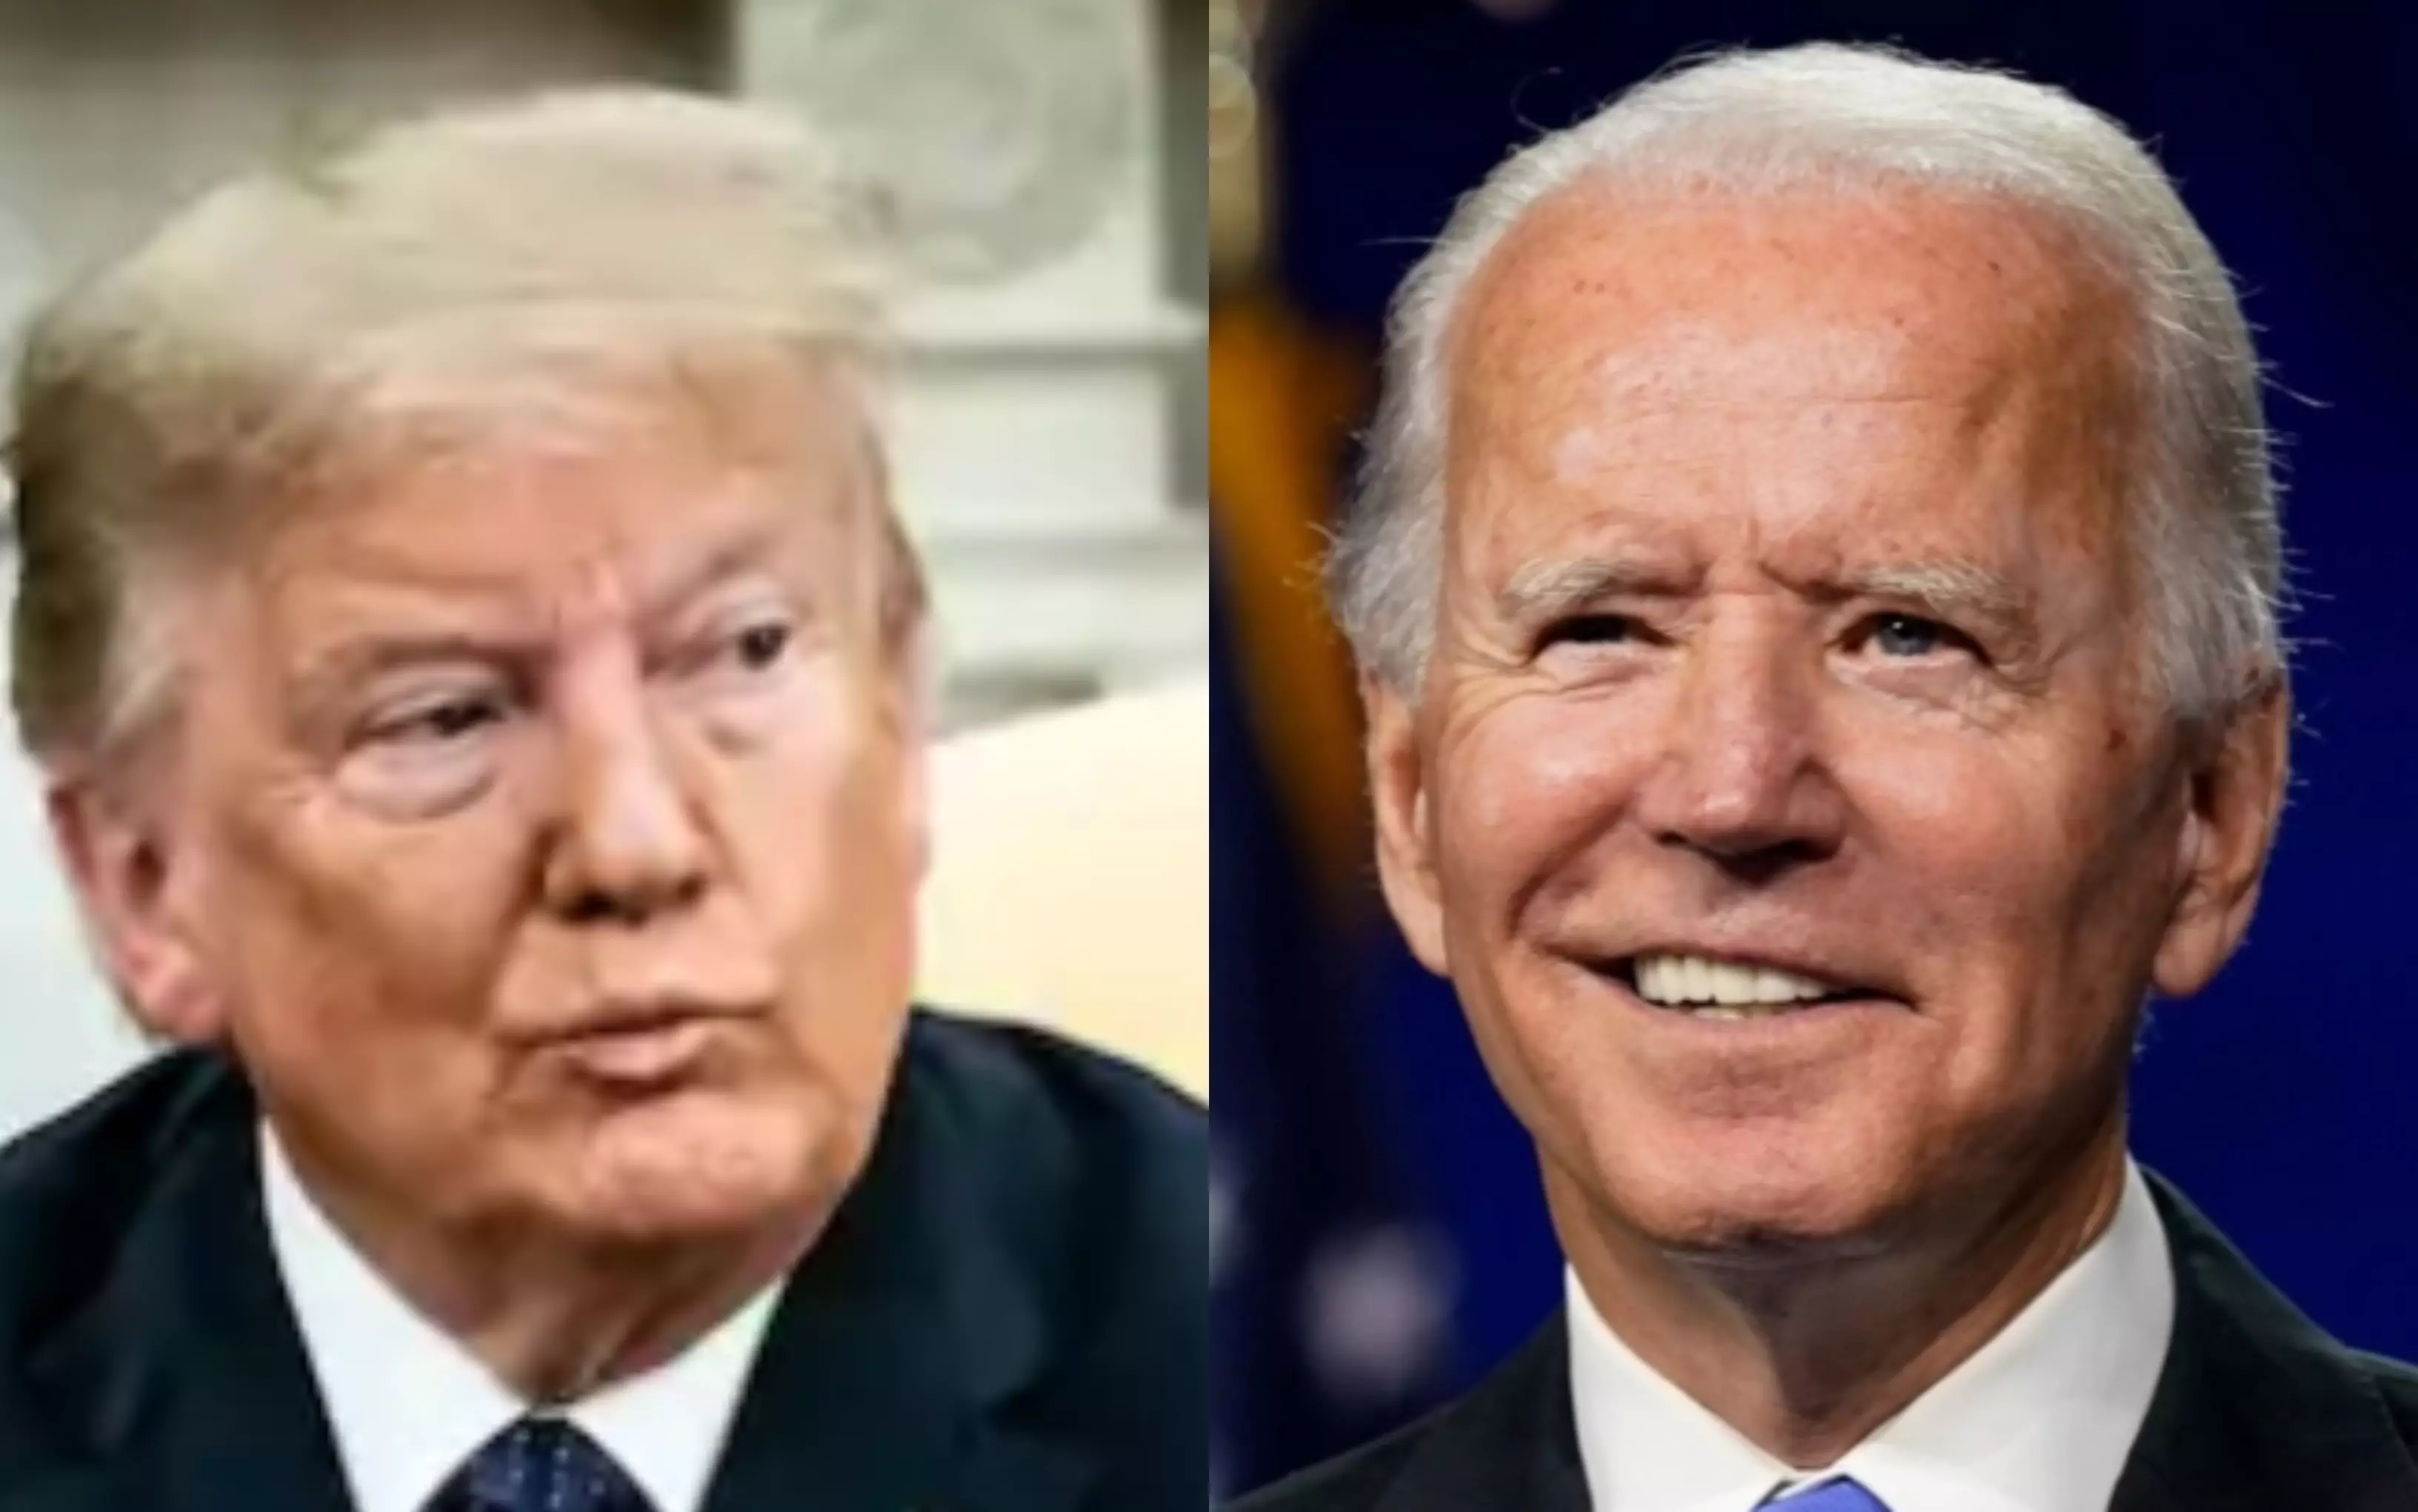 US elections 2024: A Biden vs Trump rematch is very likely, with Trump leading Biden